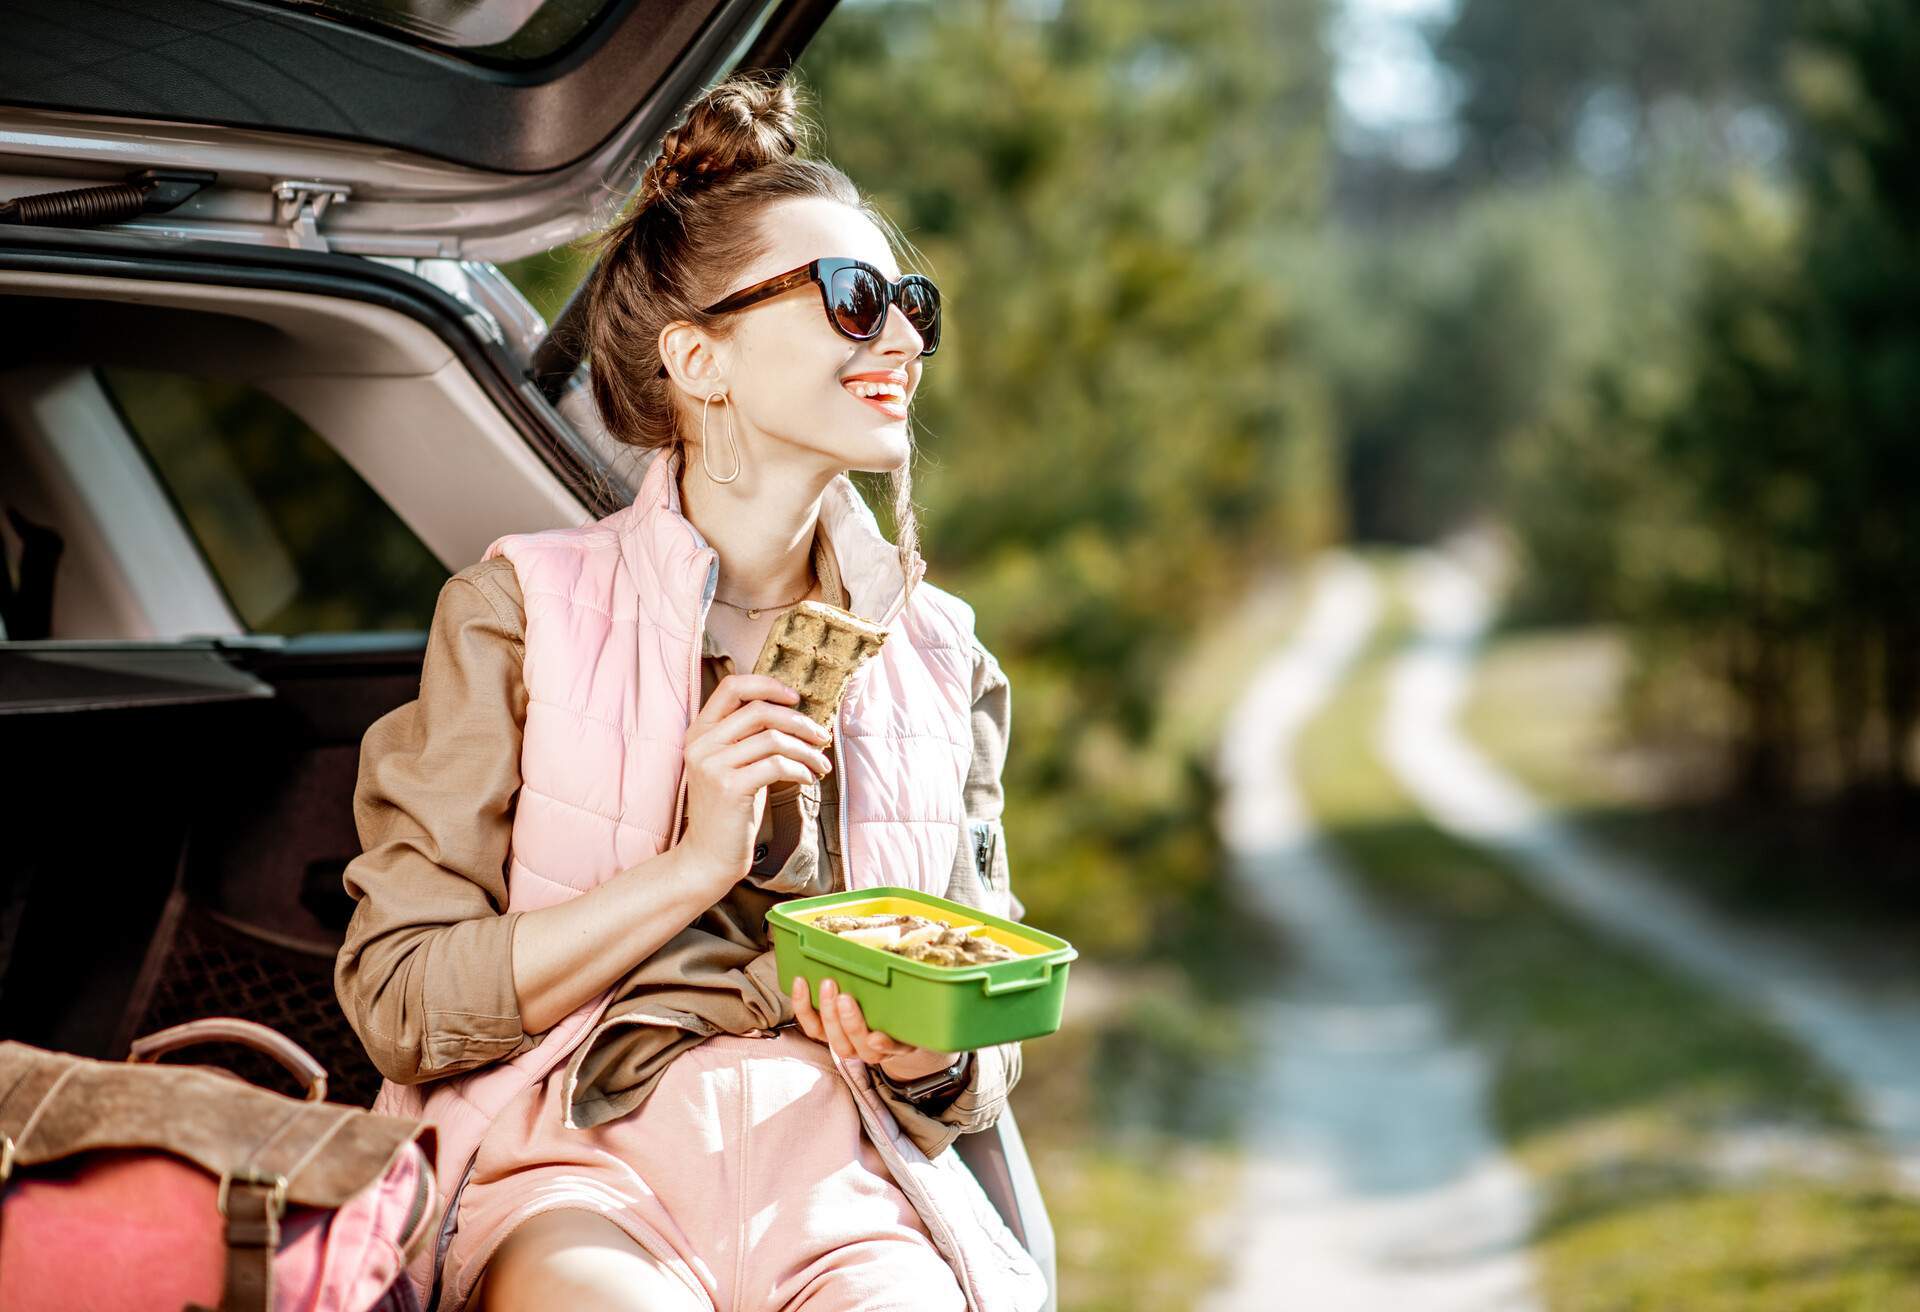 theme_car_roadtrip_people_food_packed_lunch_gettyimages-1141989773_universal_within-usage-period_83129